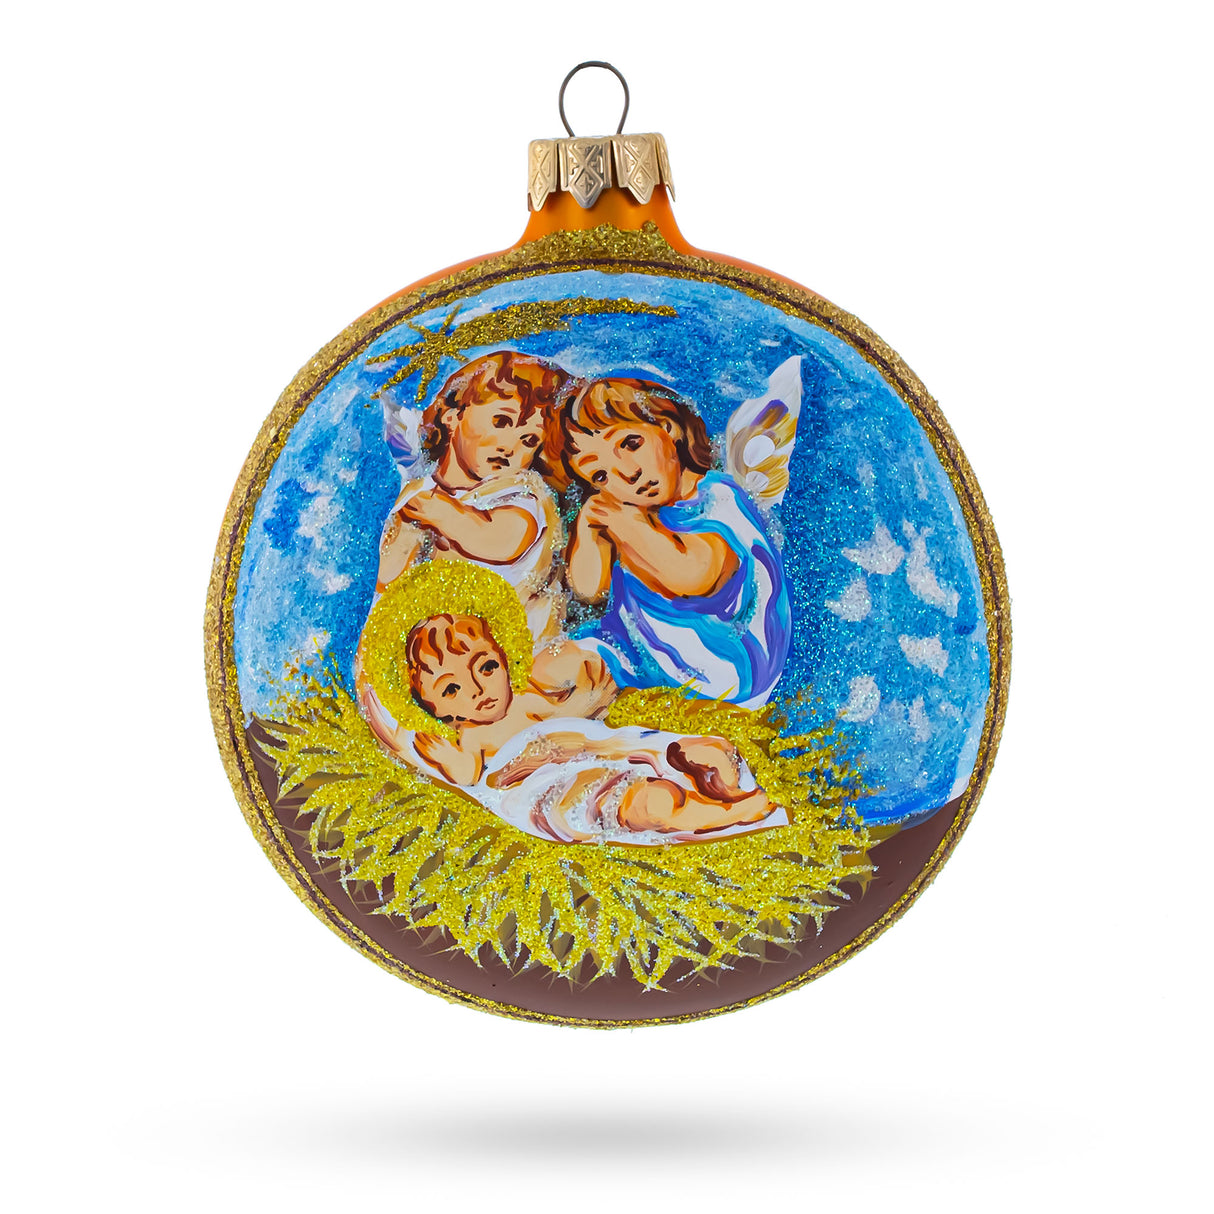 Glass Divine Angels Overlooking Baby Jesus - Blown Glass Ball Christmas Ornament 4 Inches in Gold color Round